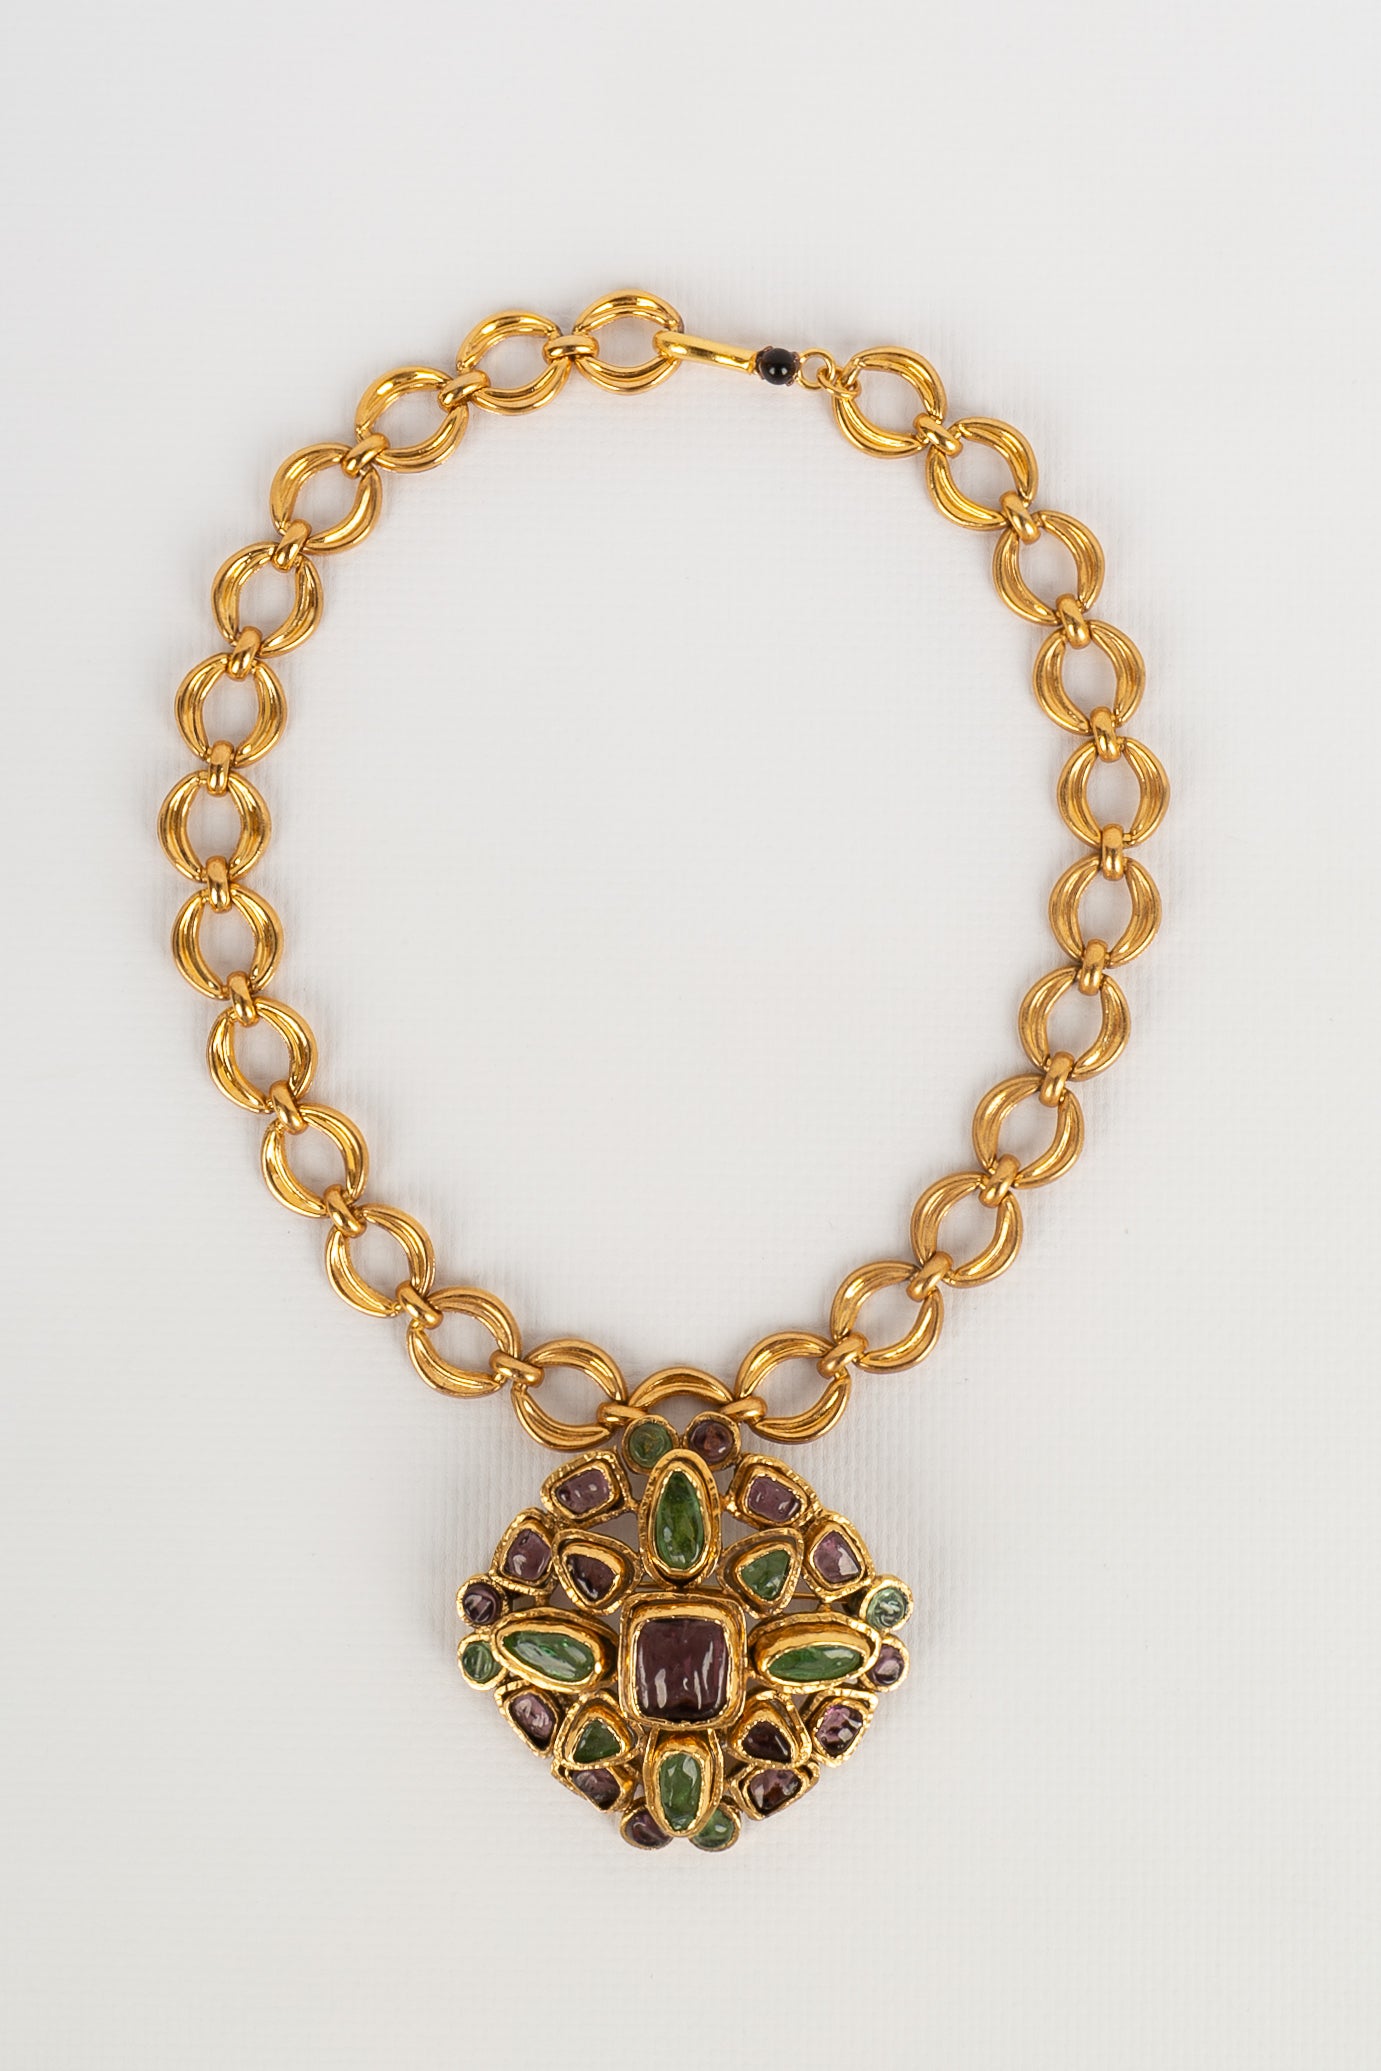 Collier Chanel 1998